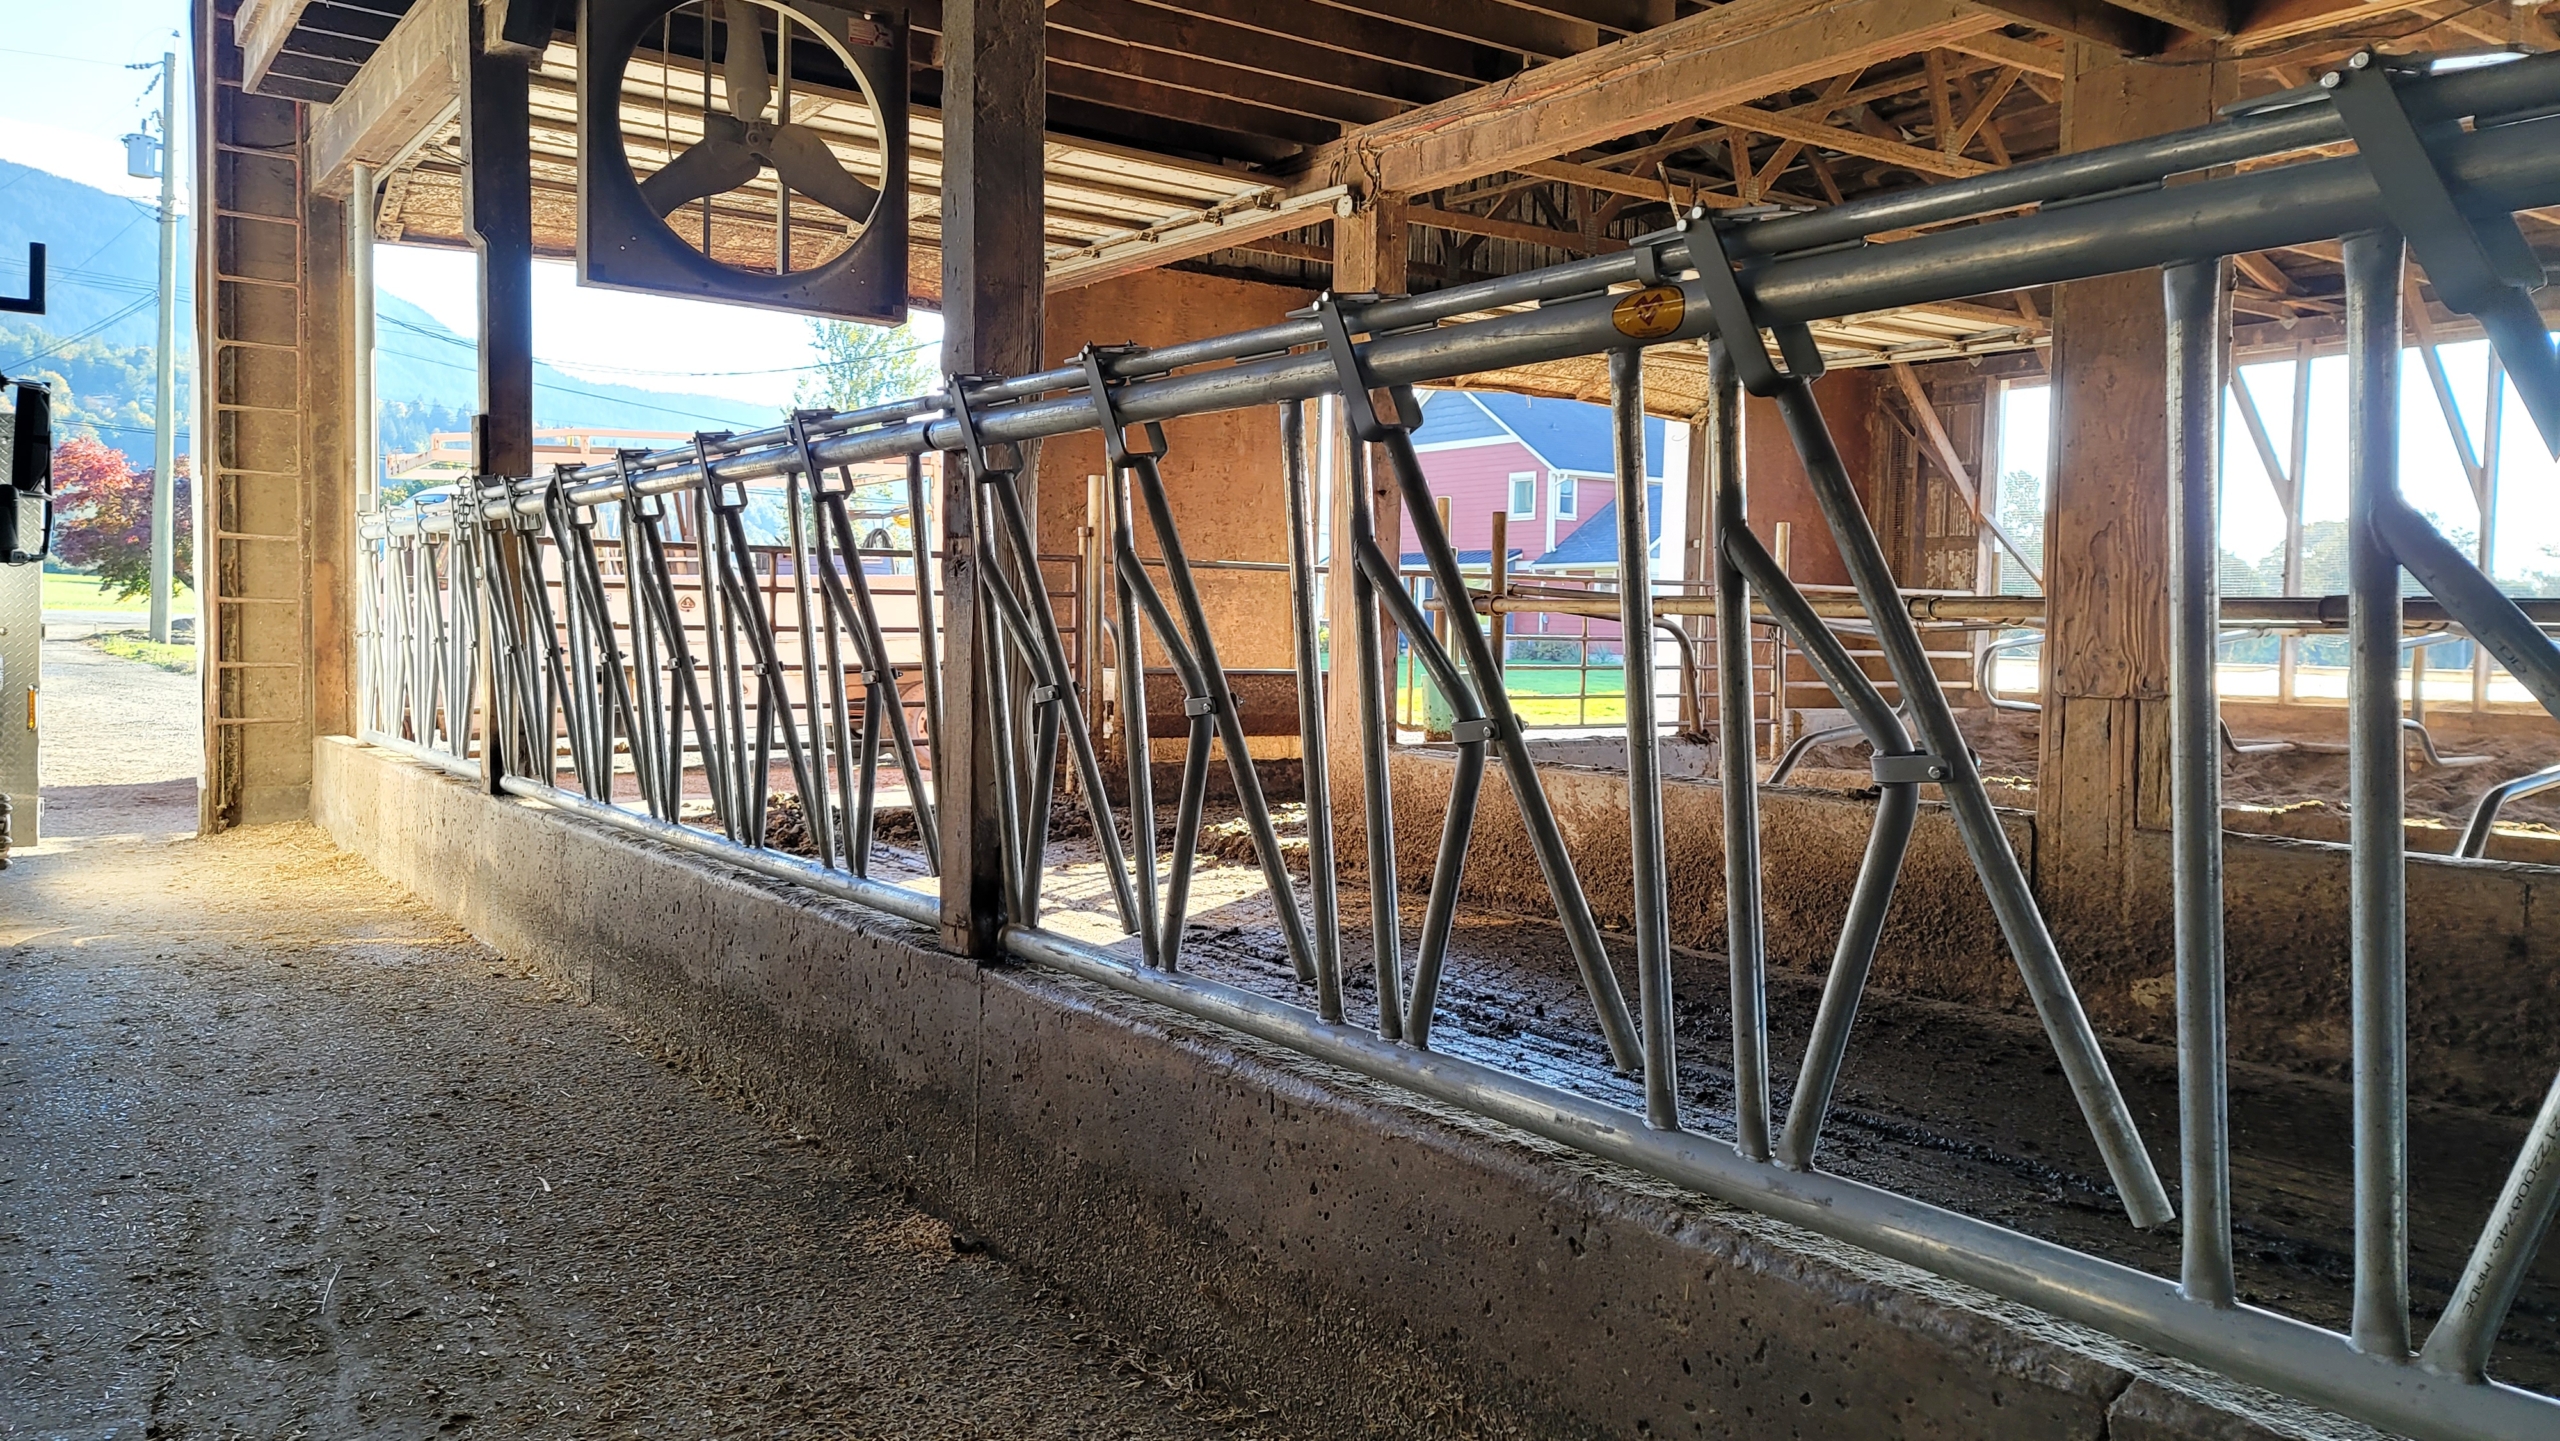 A row of metal cow stanchions installed in a barn.